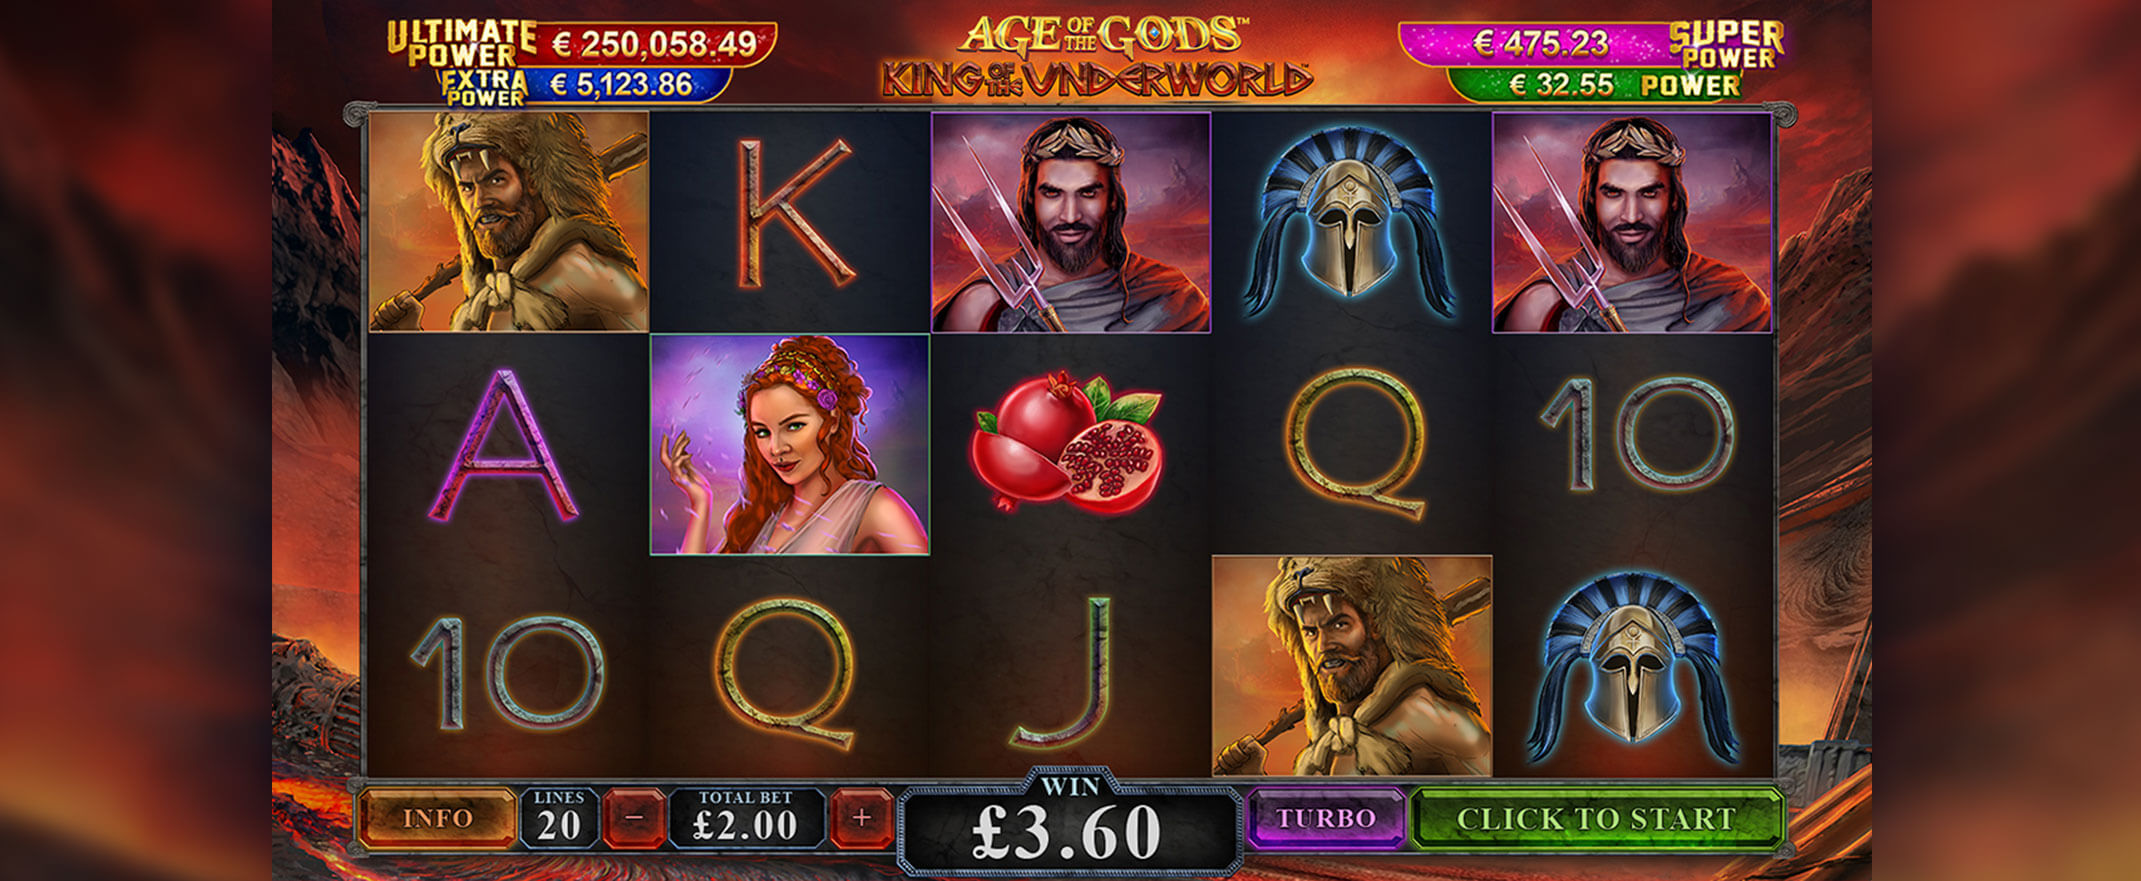 Age of the Gods: King of the Underworld Spielautomaten Bewertung